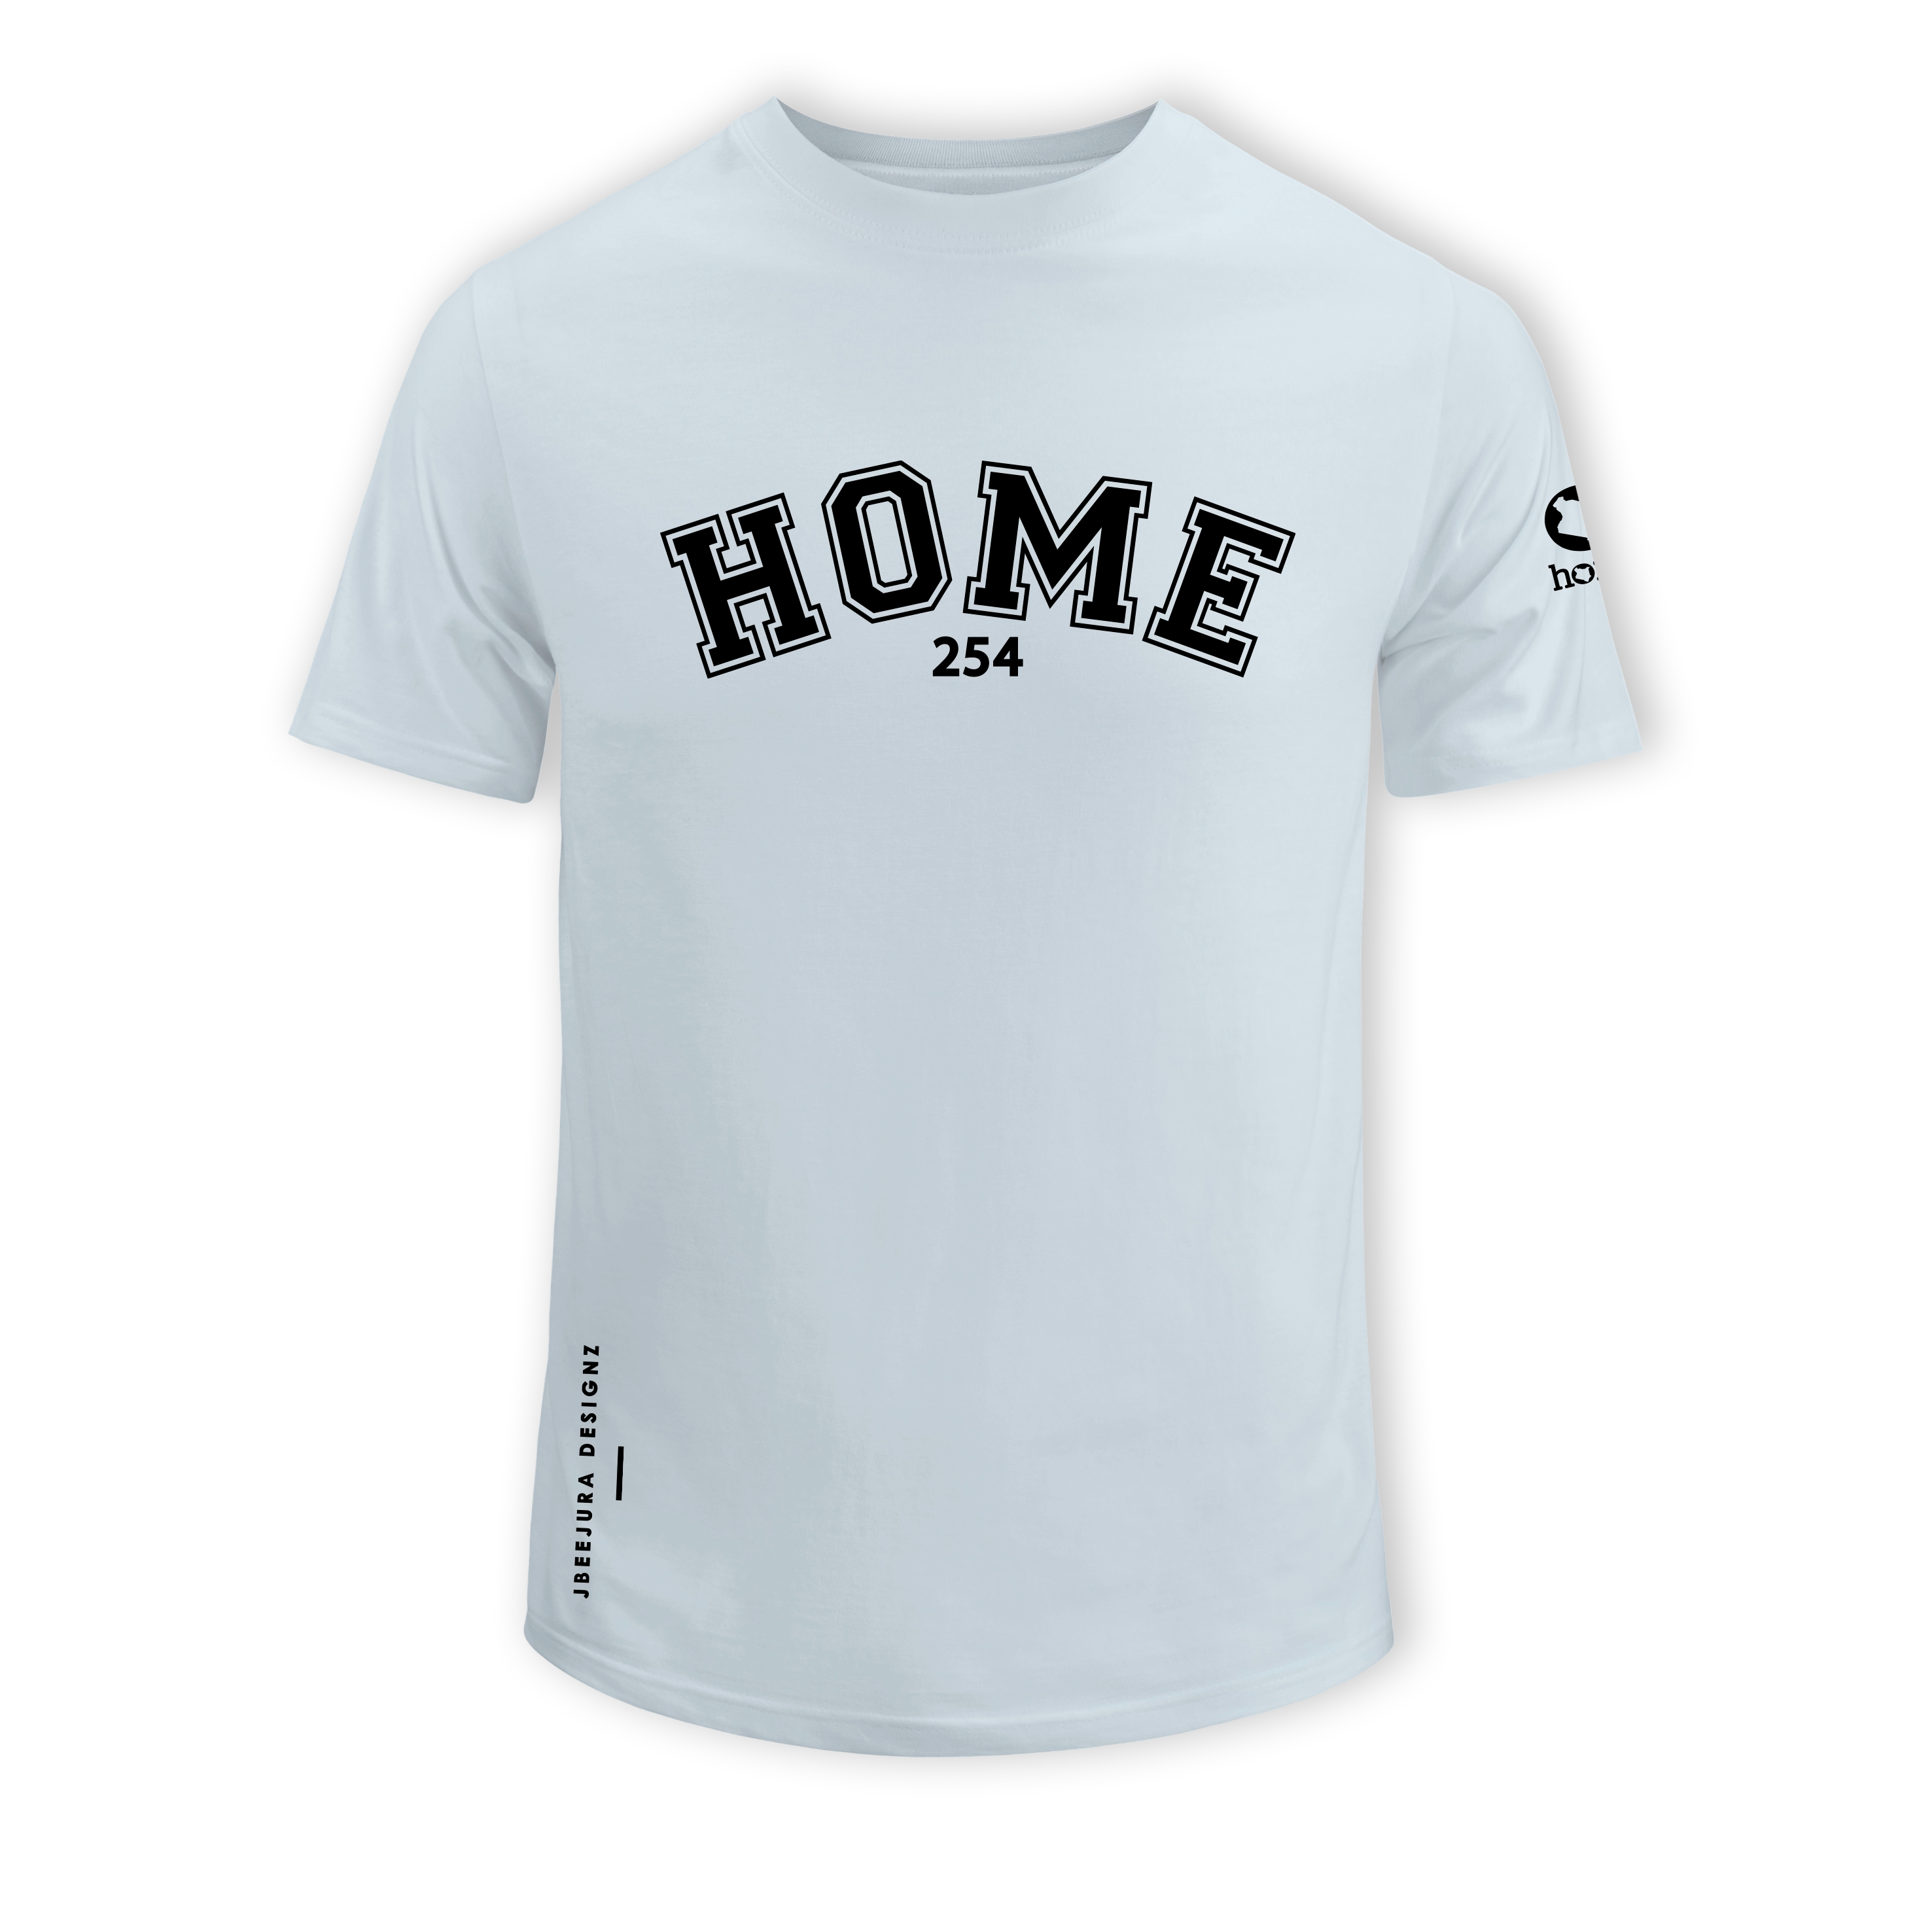 home_254 SHORT-SLEEVED SKY-BLUE T-SHIRT WITH A BLACK COLLEGE PRINT – COTTON PLUS FABRIC